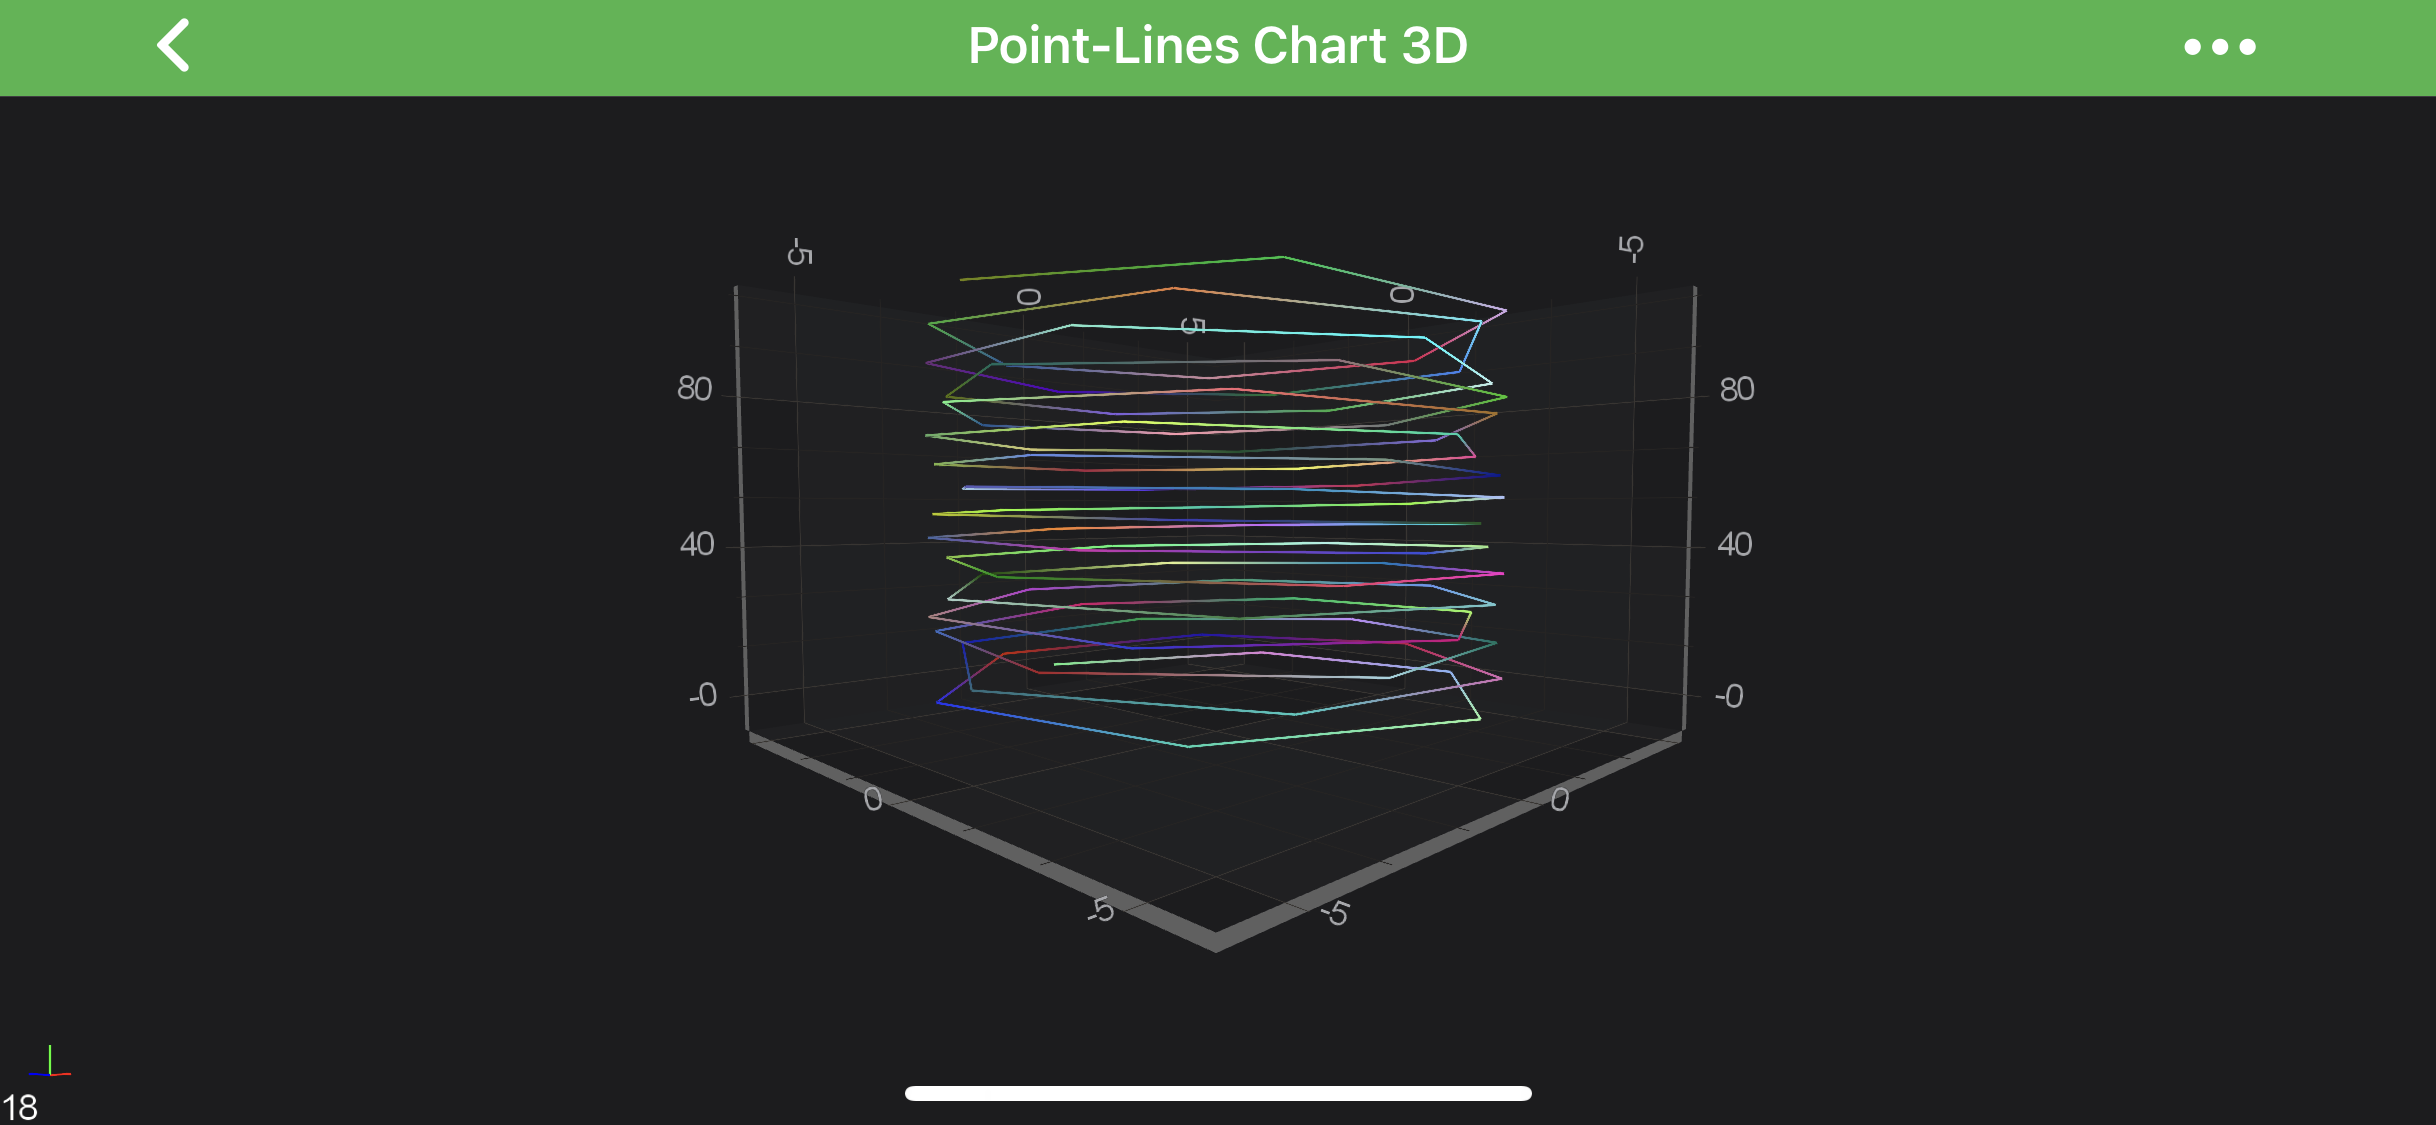 Point-Line 3D Series Type (No PointMarkers)